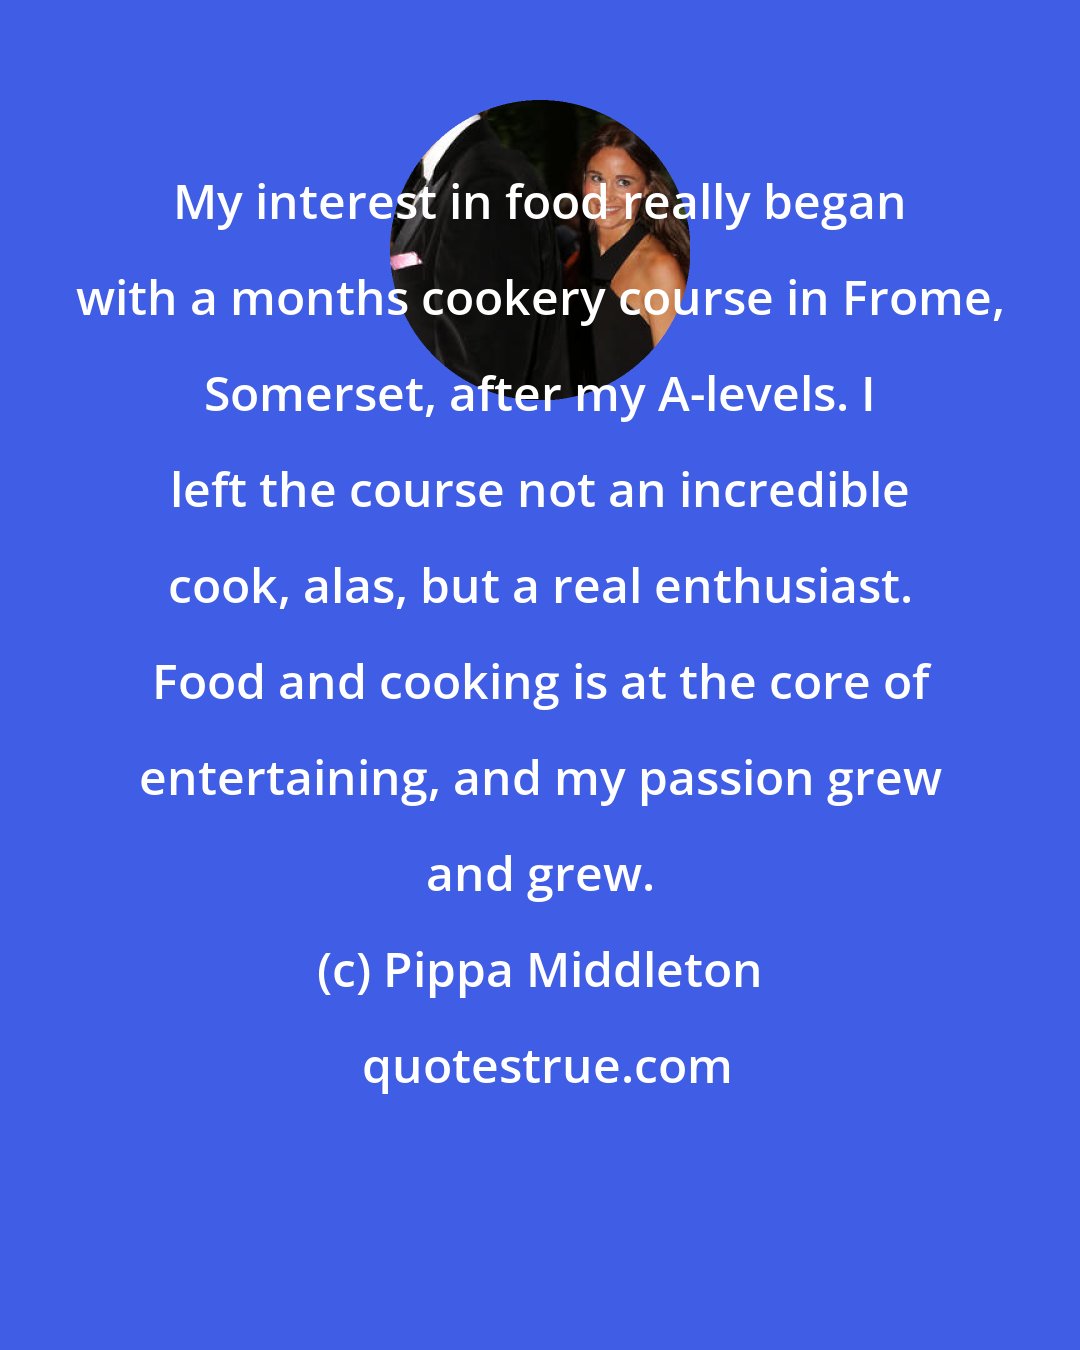 Pippa Middleton: My interest in food really began with a months cookery course in Frome, Somerset, after my A-levels. I left the course not an incredible cook, alas, but a real enthusiast. Food and cooking is at the core of entertaining, and my passion grew and grew.